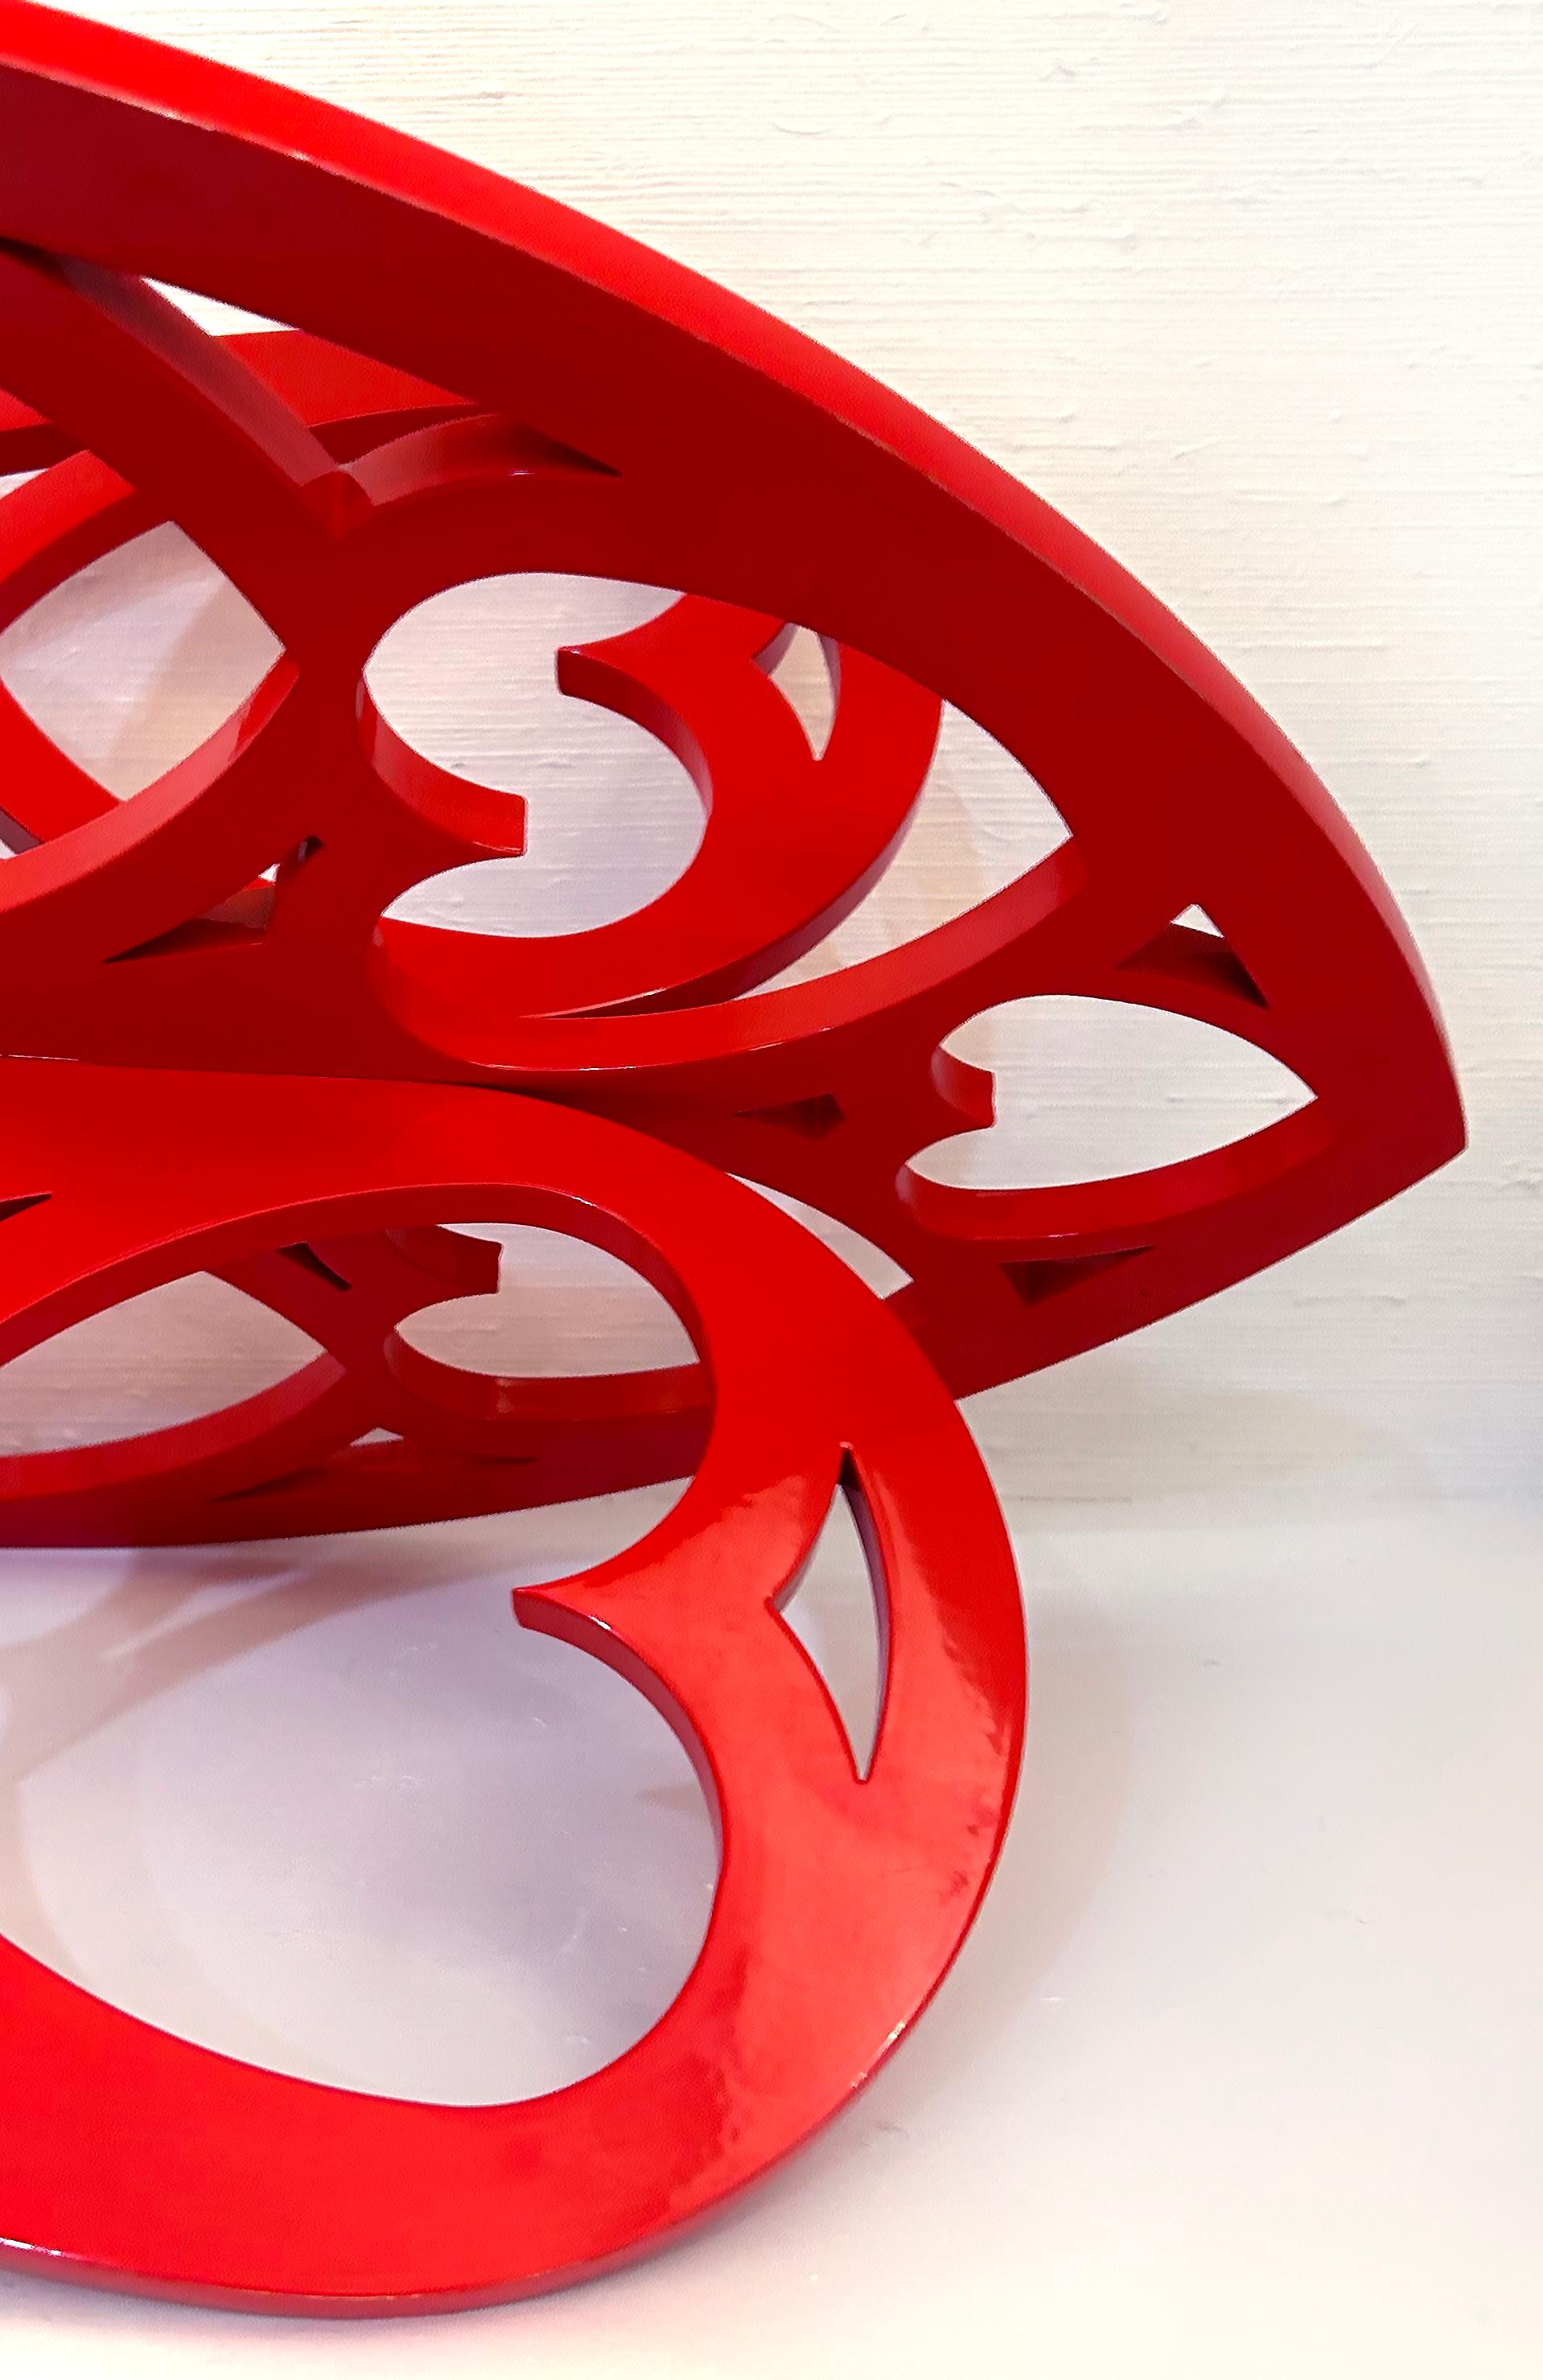 Contemporary Interlocking Hearts Powder-coated Aluminum Lace Sculpture by Michael Gitter For Sale